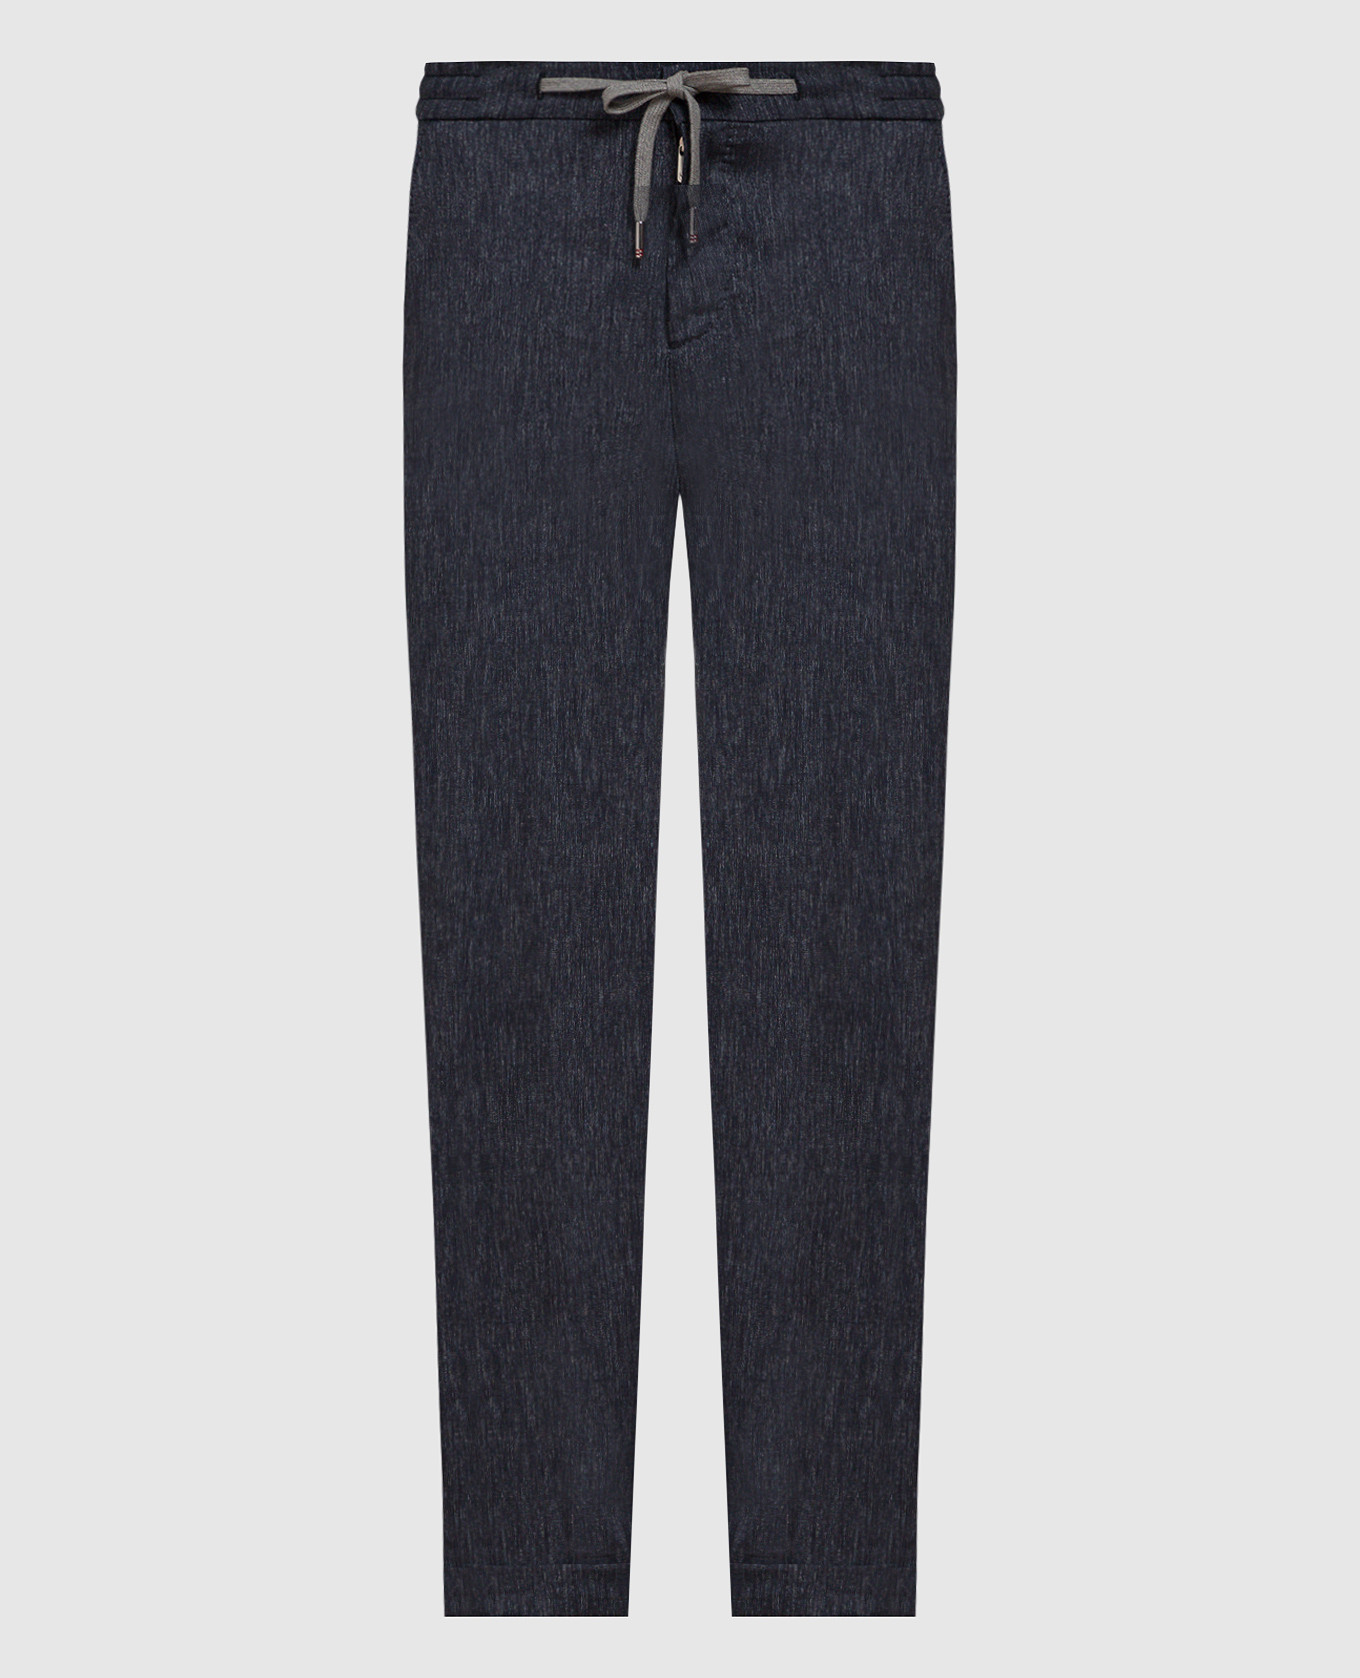 CARACCIOLO blue pants made of cashmere and linen